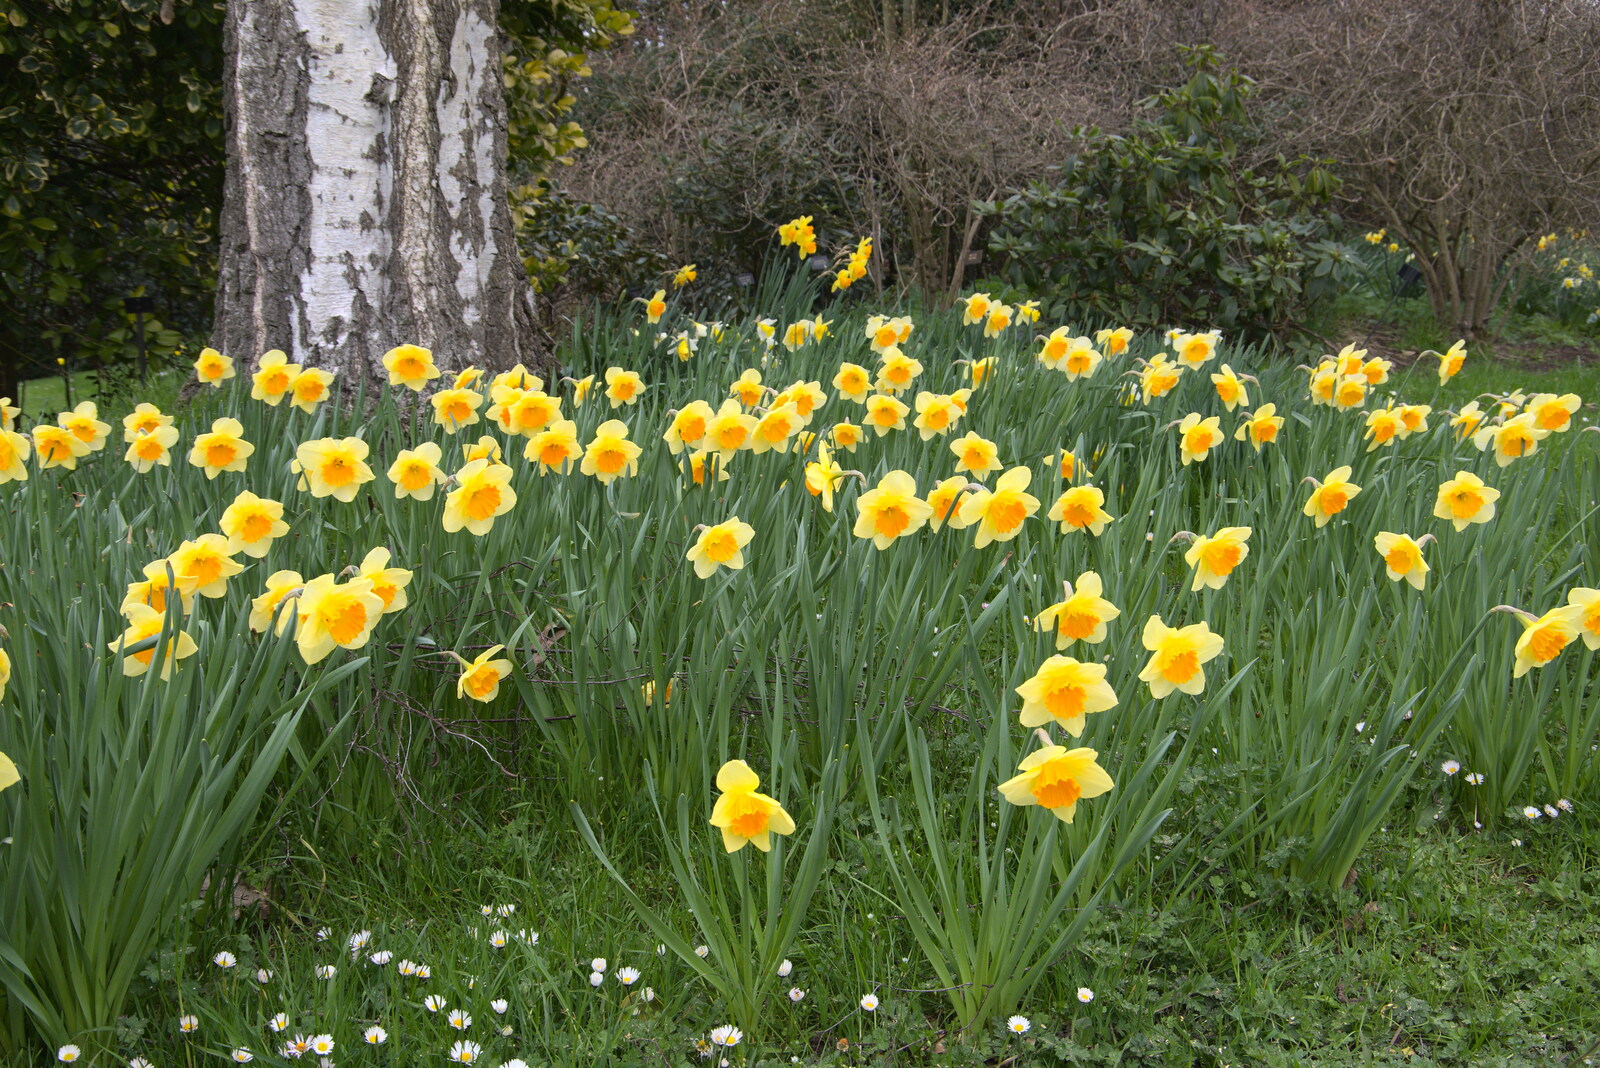 Sunny daffodils from A Return to Bressingham Steam and Gardens, Bressingham, Norfolk - 28th March 2021